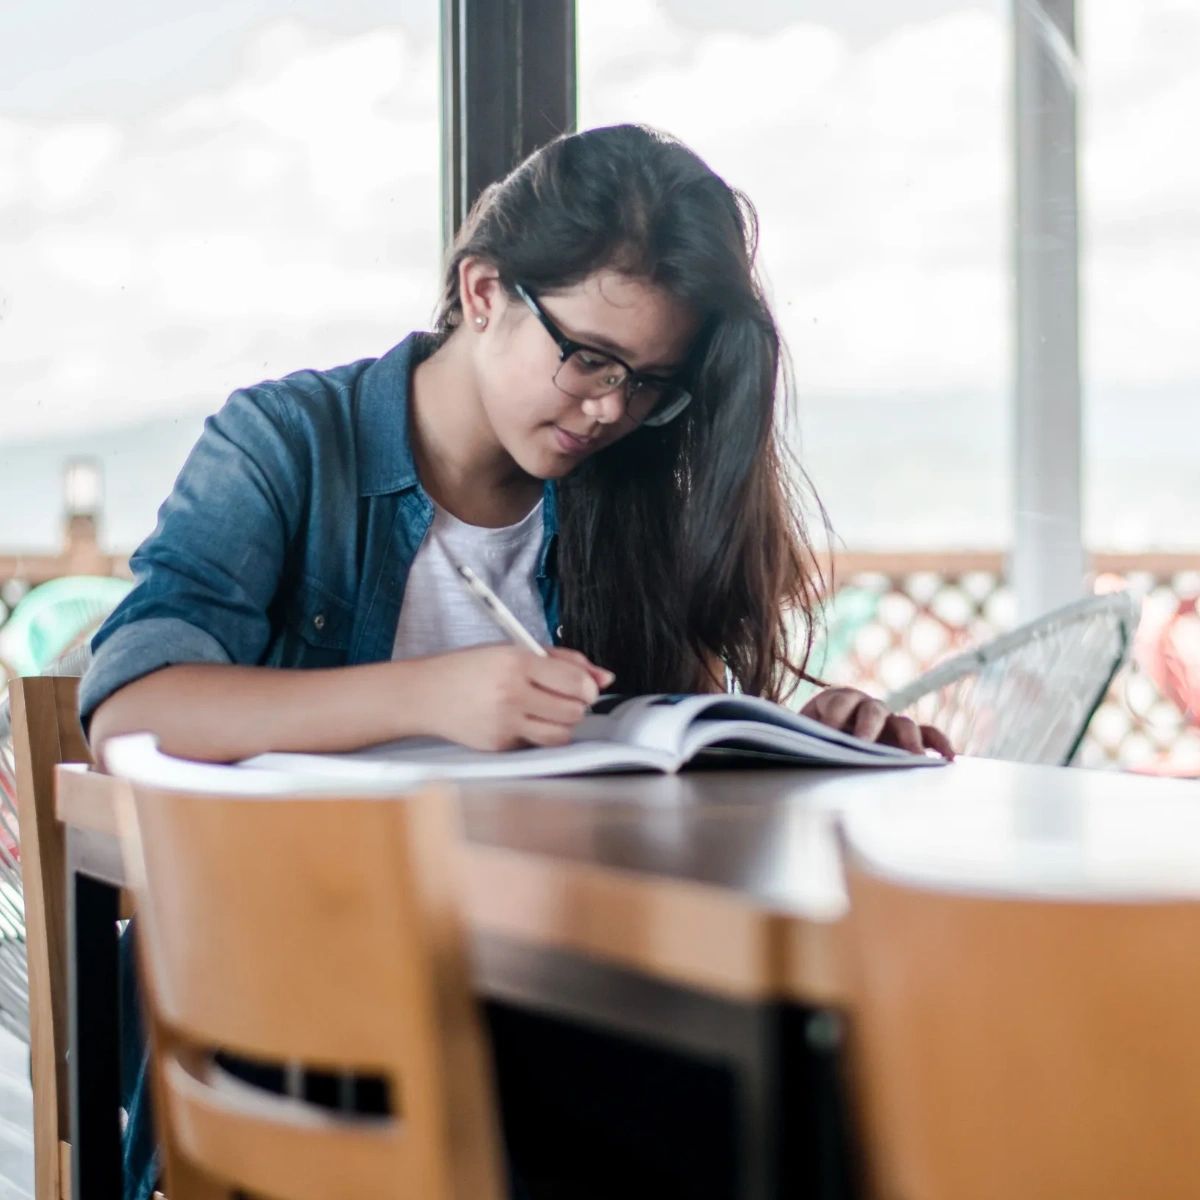 Quick tip: When studying for exams, try breaking up your study sessions into shorter, focused blocks of time. This can improve retention and help you stay more engaged. #NorthsideTutoring #SATTutoring #ACTTutoring #Tutoring #Atlanta #Buckhead #Georgia